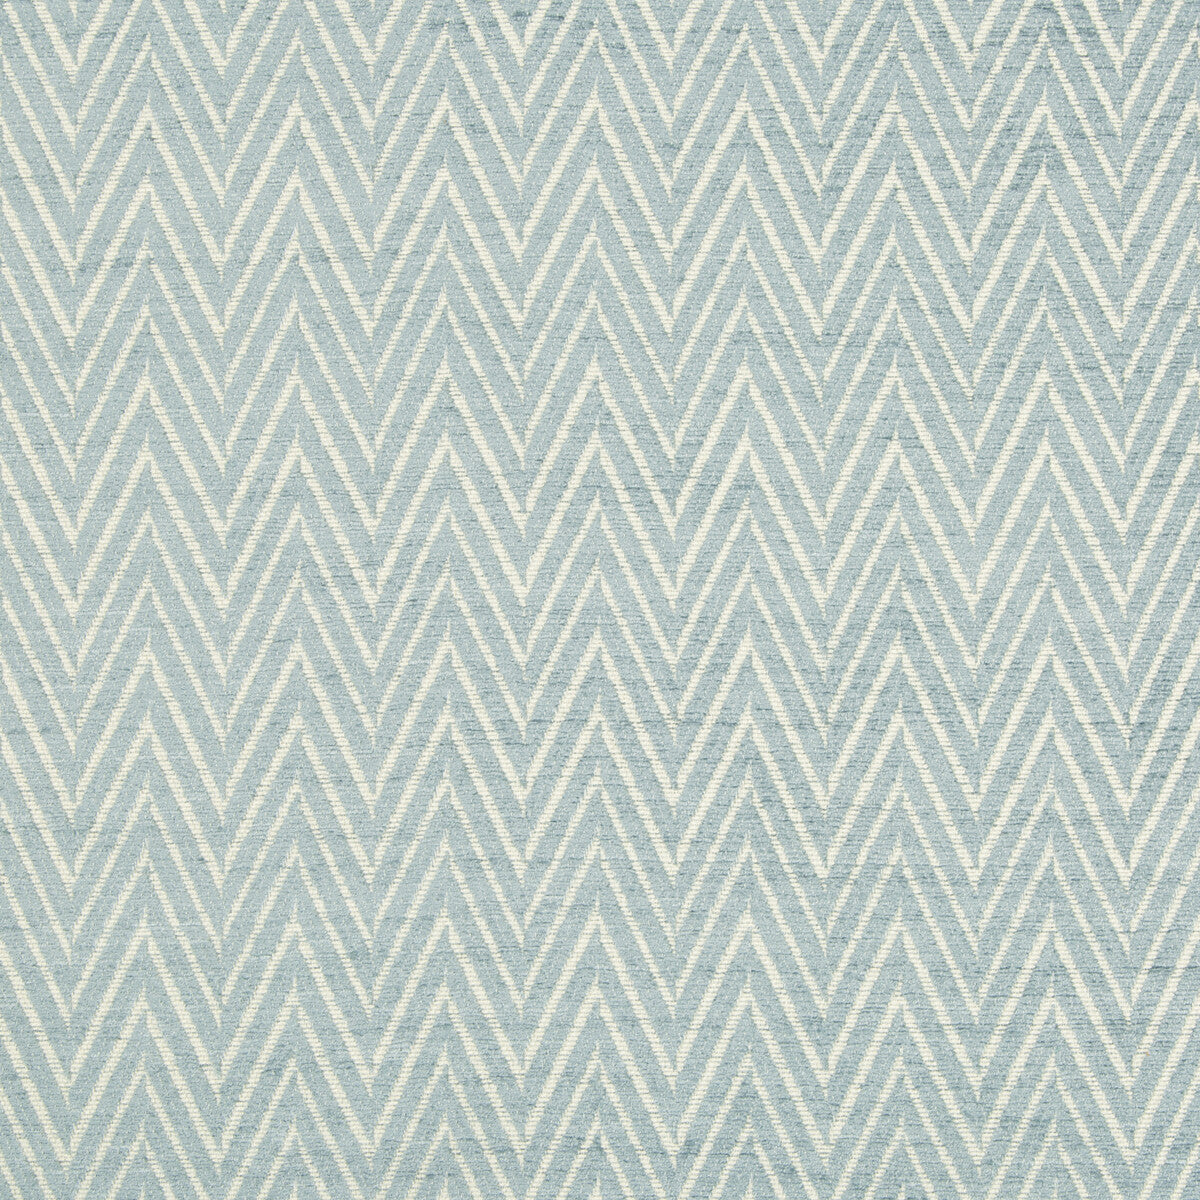 Kravet Contract fabric in 34743-5 color - pattern 34743.5.0 - by Kravet Contract in the Incase Crypton Gis collection